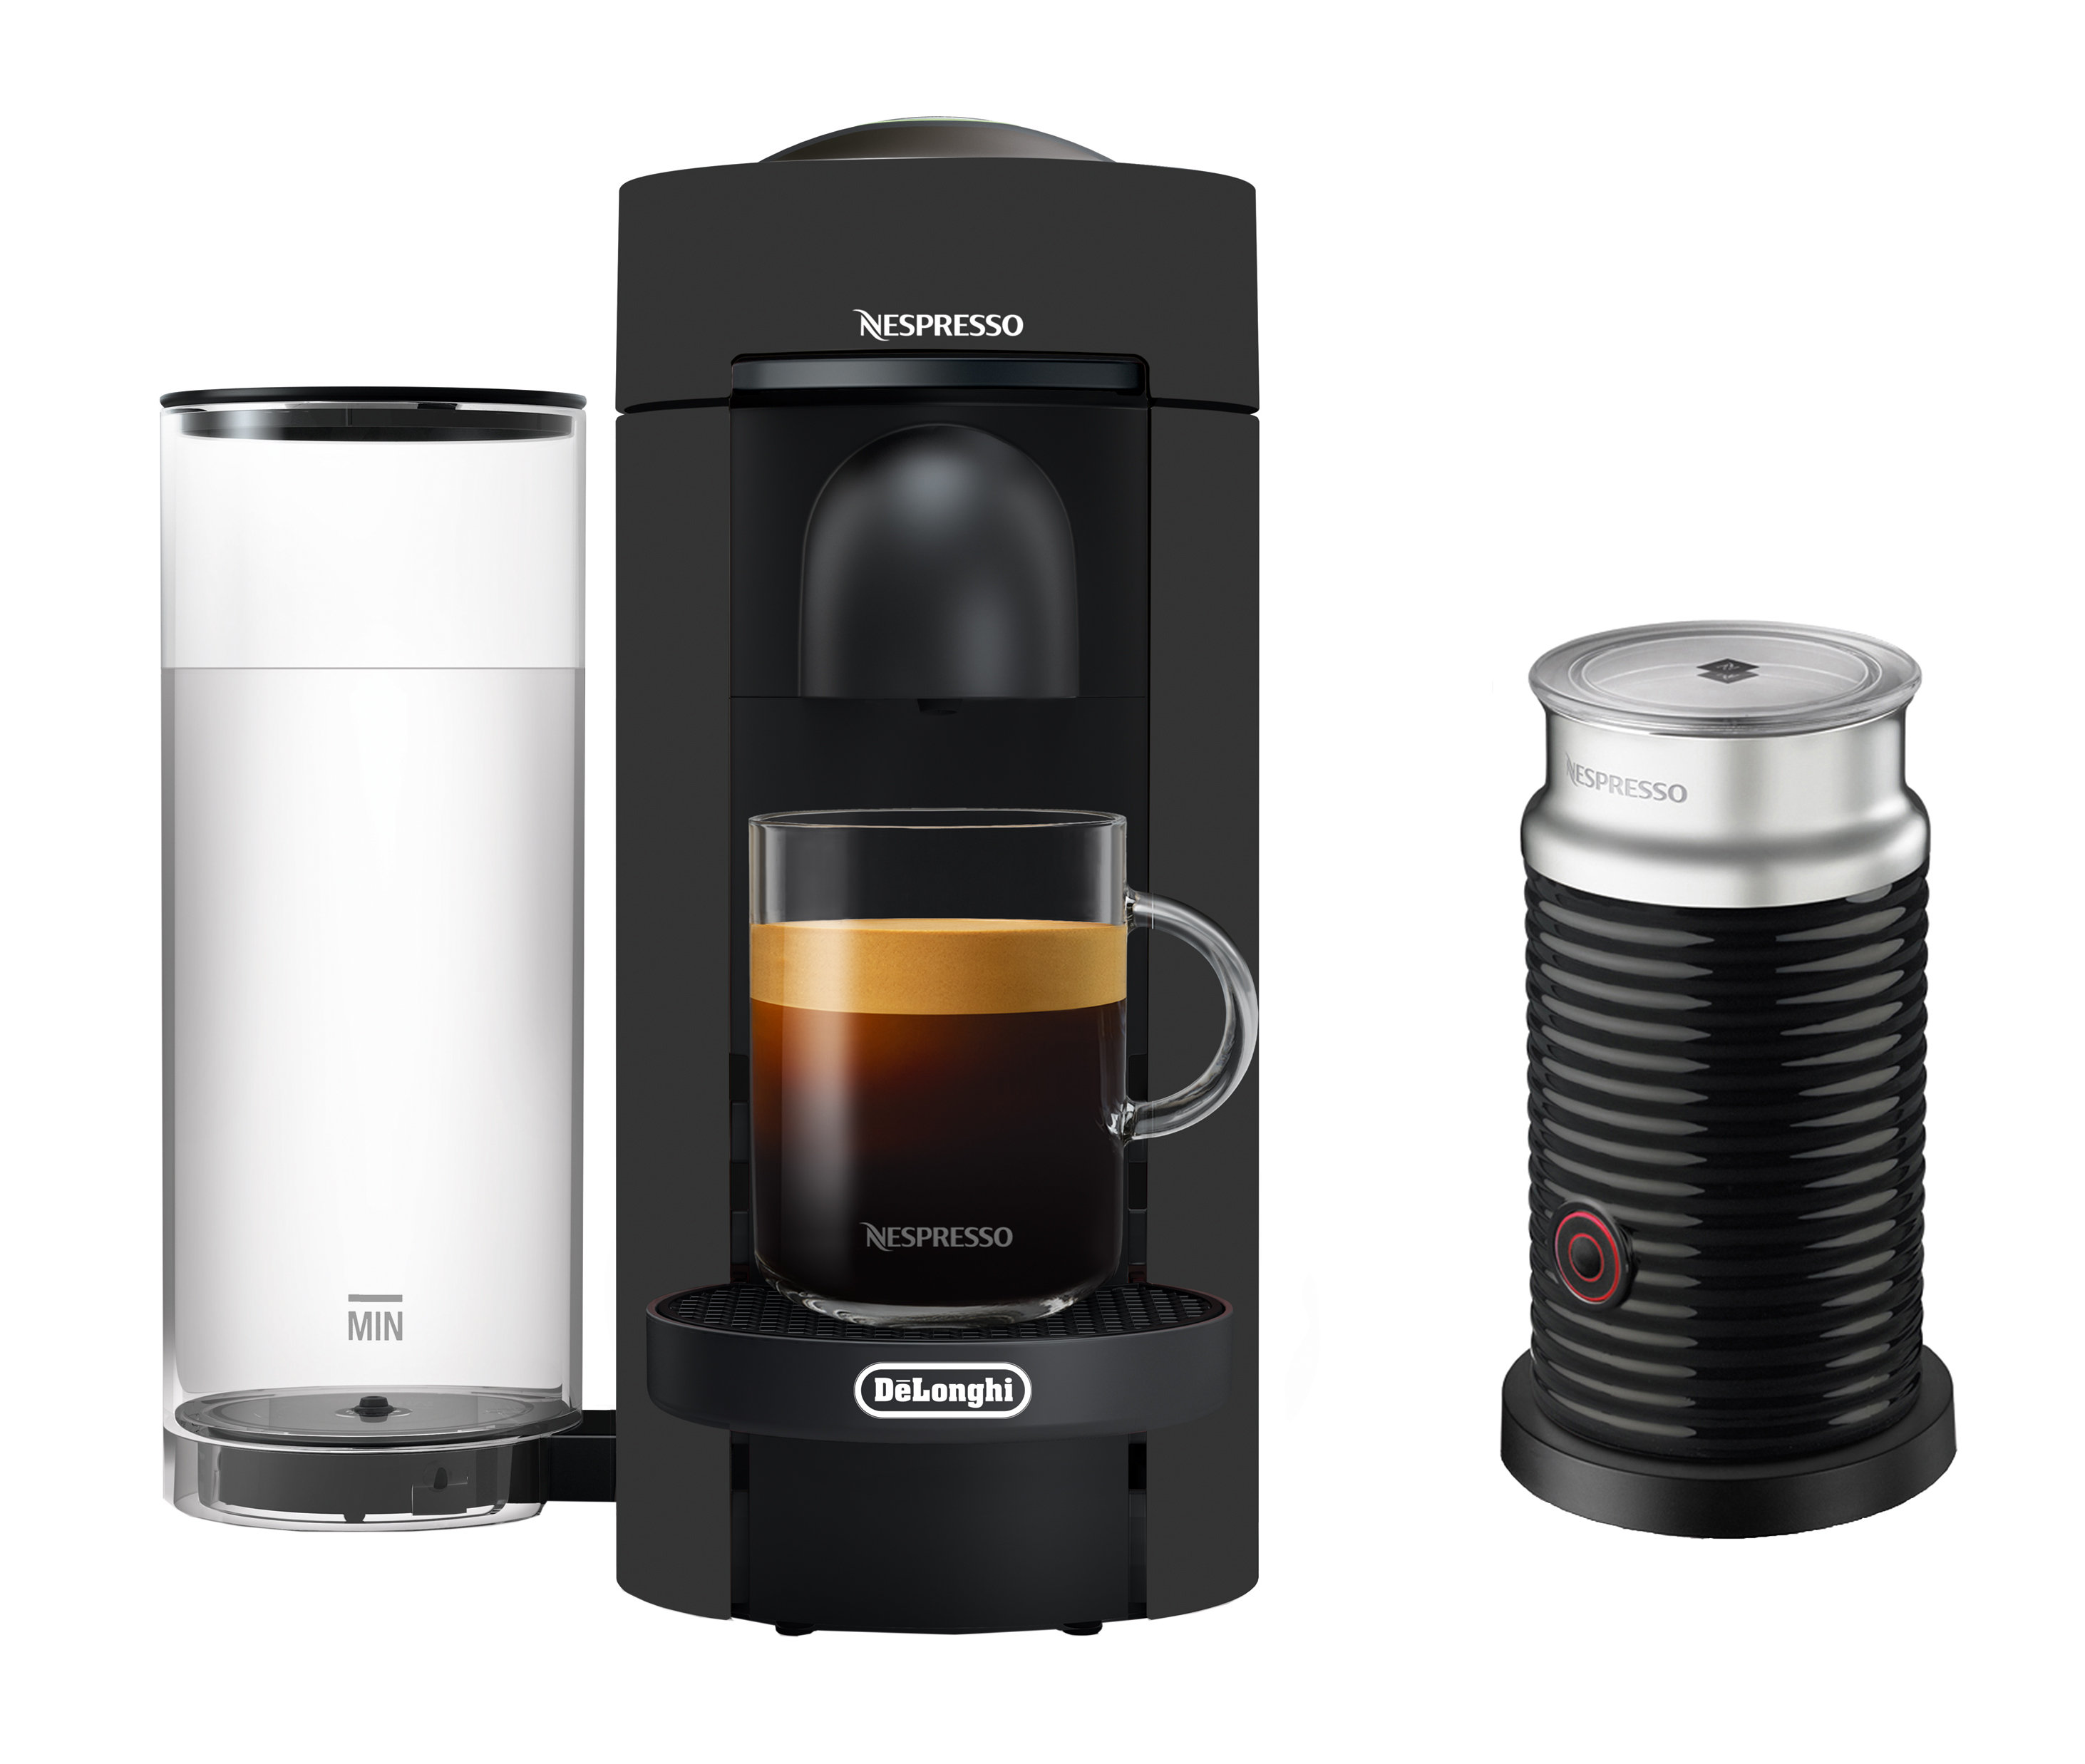 INTRODUCING NEWEST MEMBER TO THE ESPRESSO CLUB™: DE'LONGHI MAGNIFICA EVO  FULLY AUTOMATIC COFFEE MACHINE